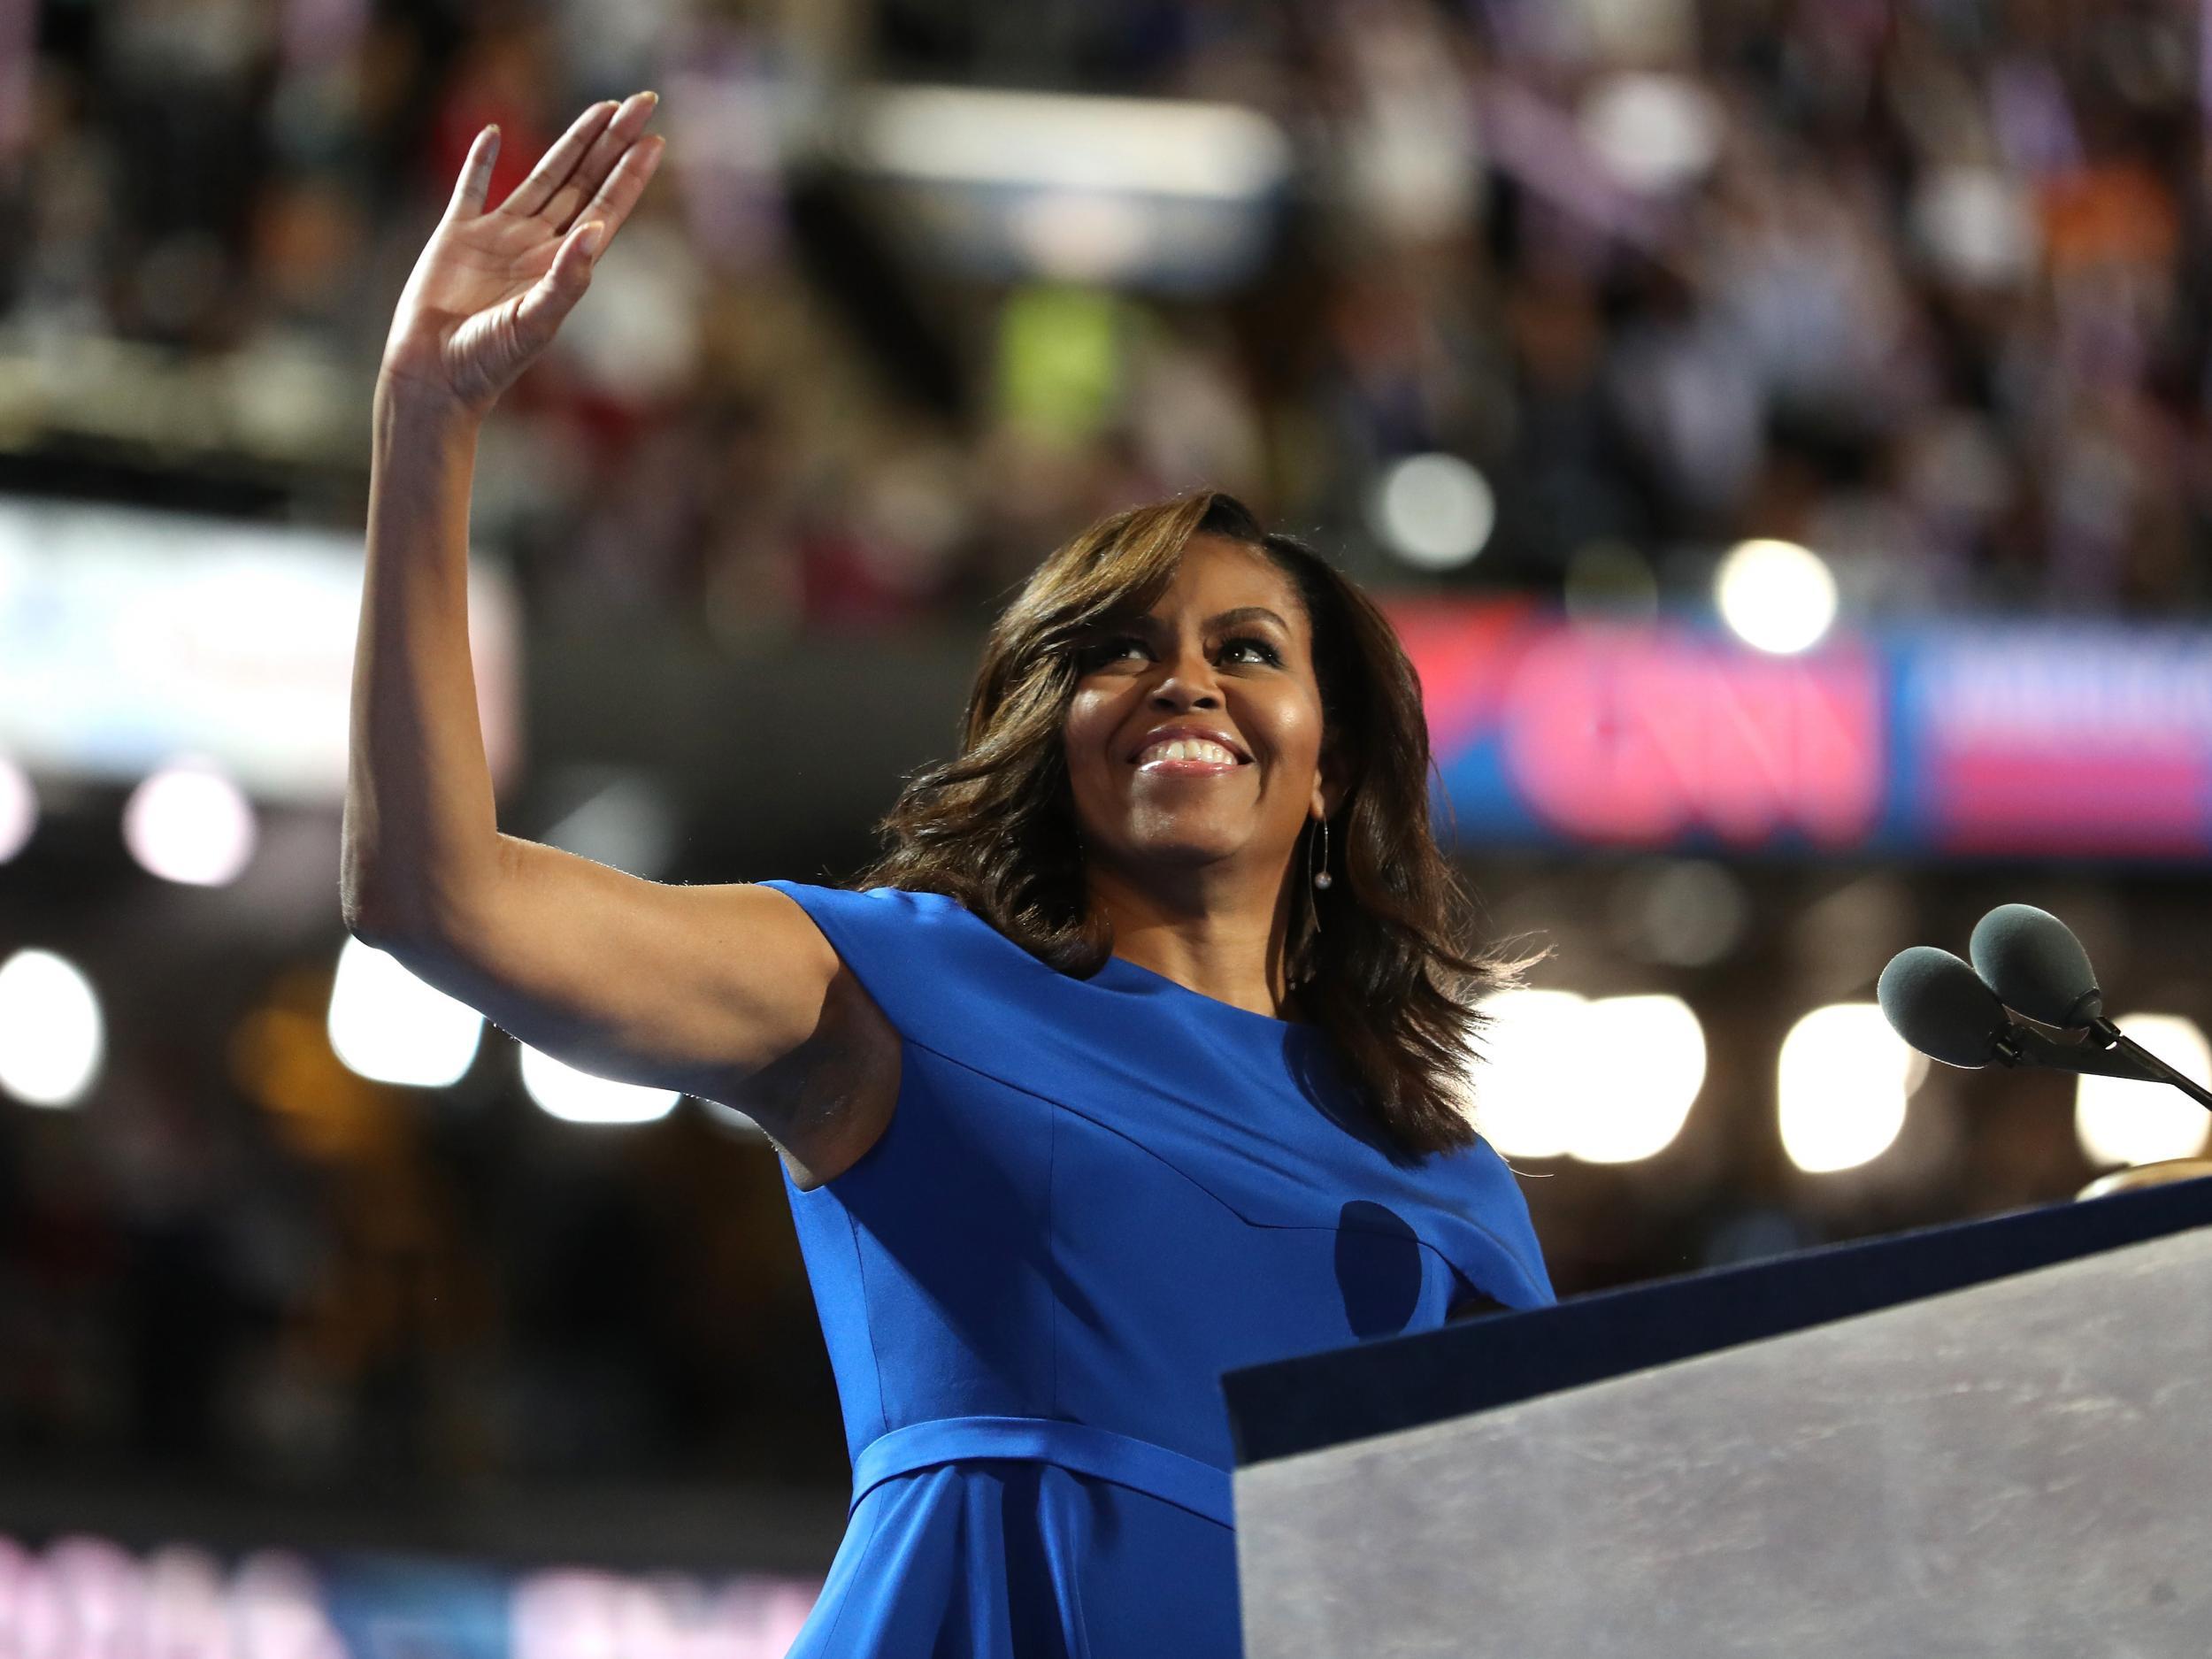 There have been calls for Michelle Obama to campaign for President in 2020